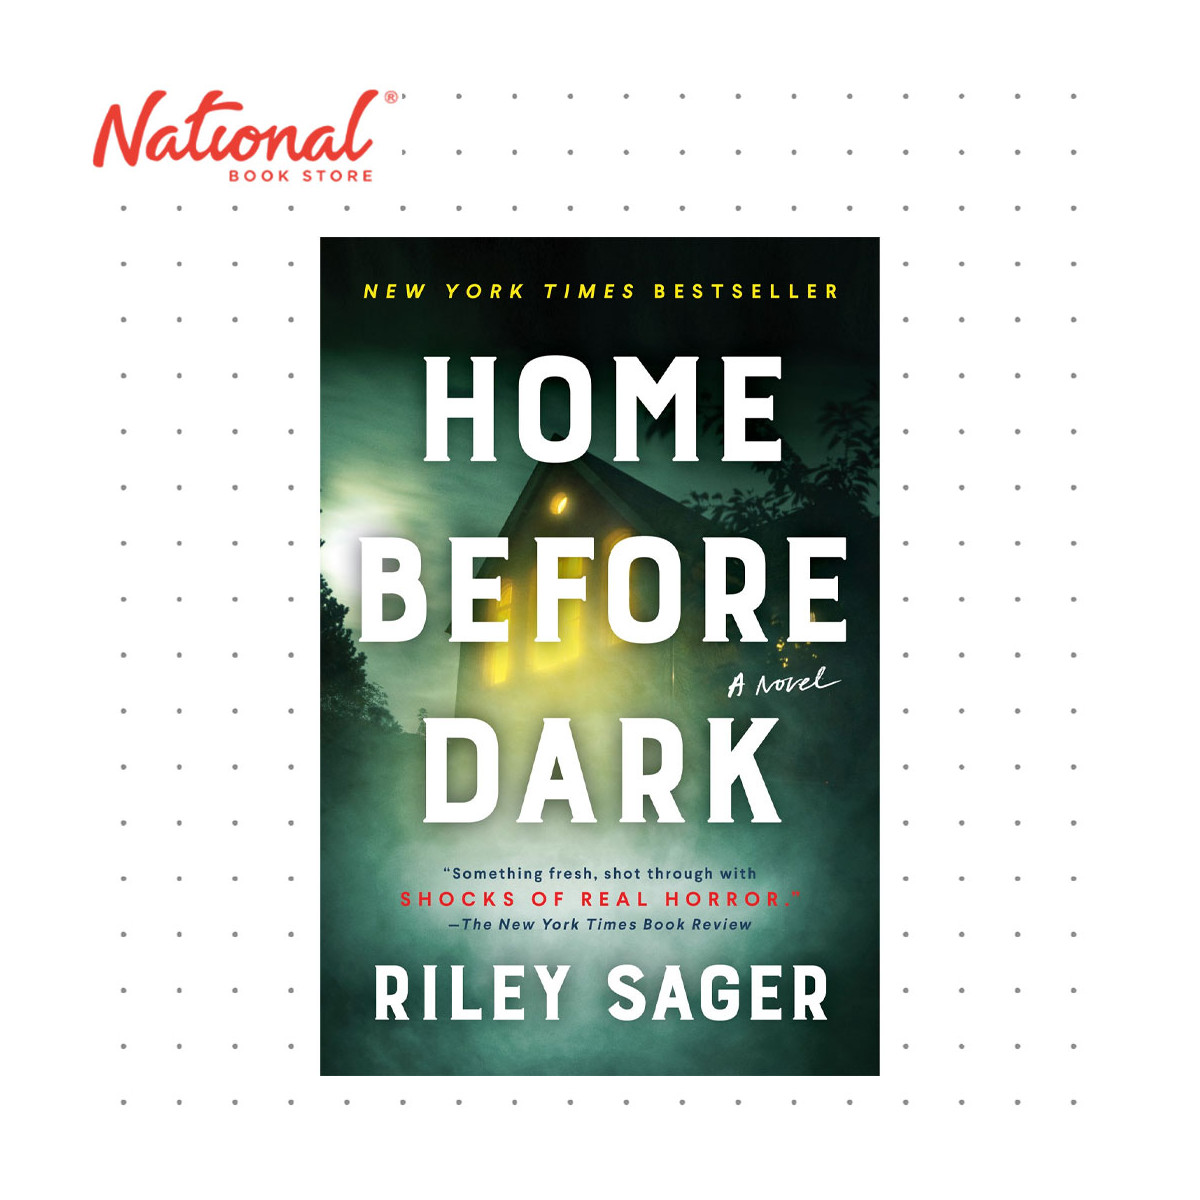 Home Before Dark: A Novel by Riley Sager - Trade Paperback - Thriller, Mystery & Suspense